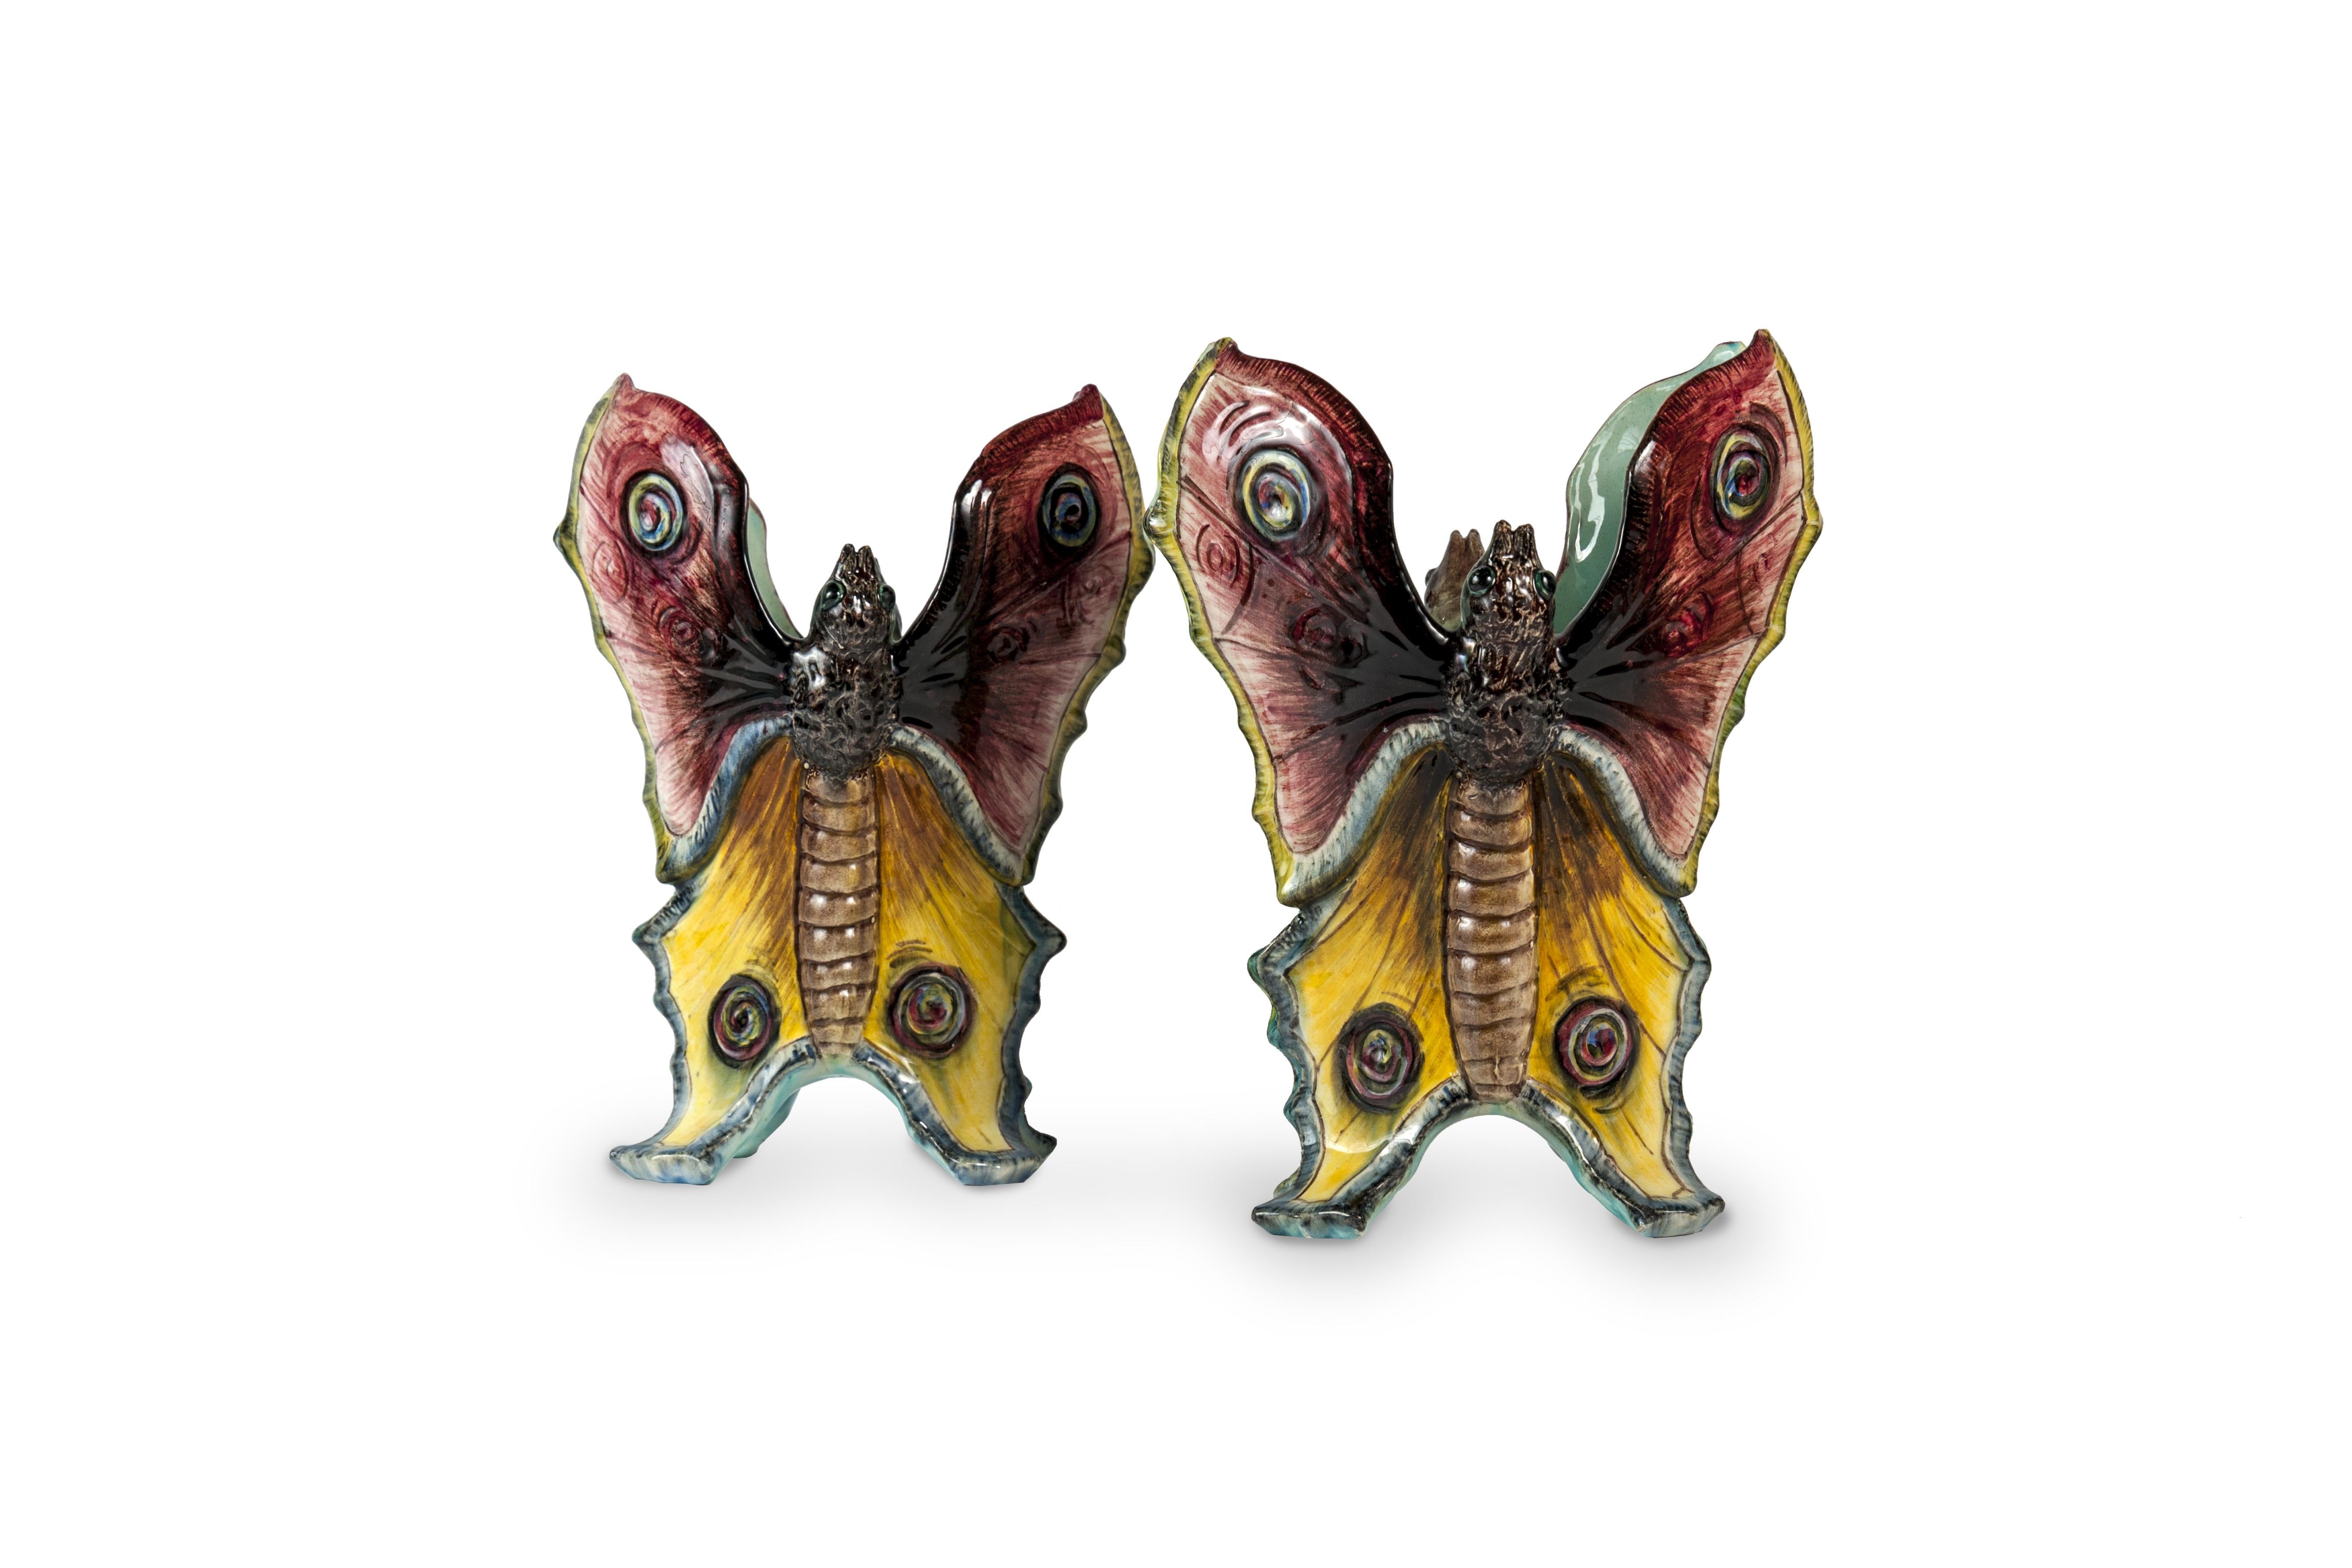 These two butterfly vases, initiated by Jérôme Massier fils, are treated on a biomorphic principle: imitating two butterflies, they are an ode to creativity. These two butterfly vases rest on four feet each, formed by the tapered bottom of the